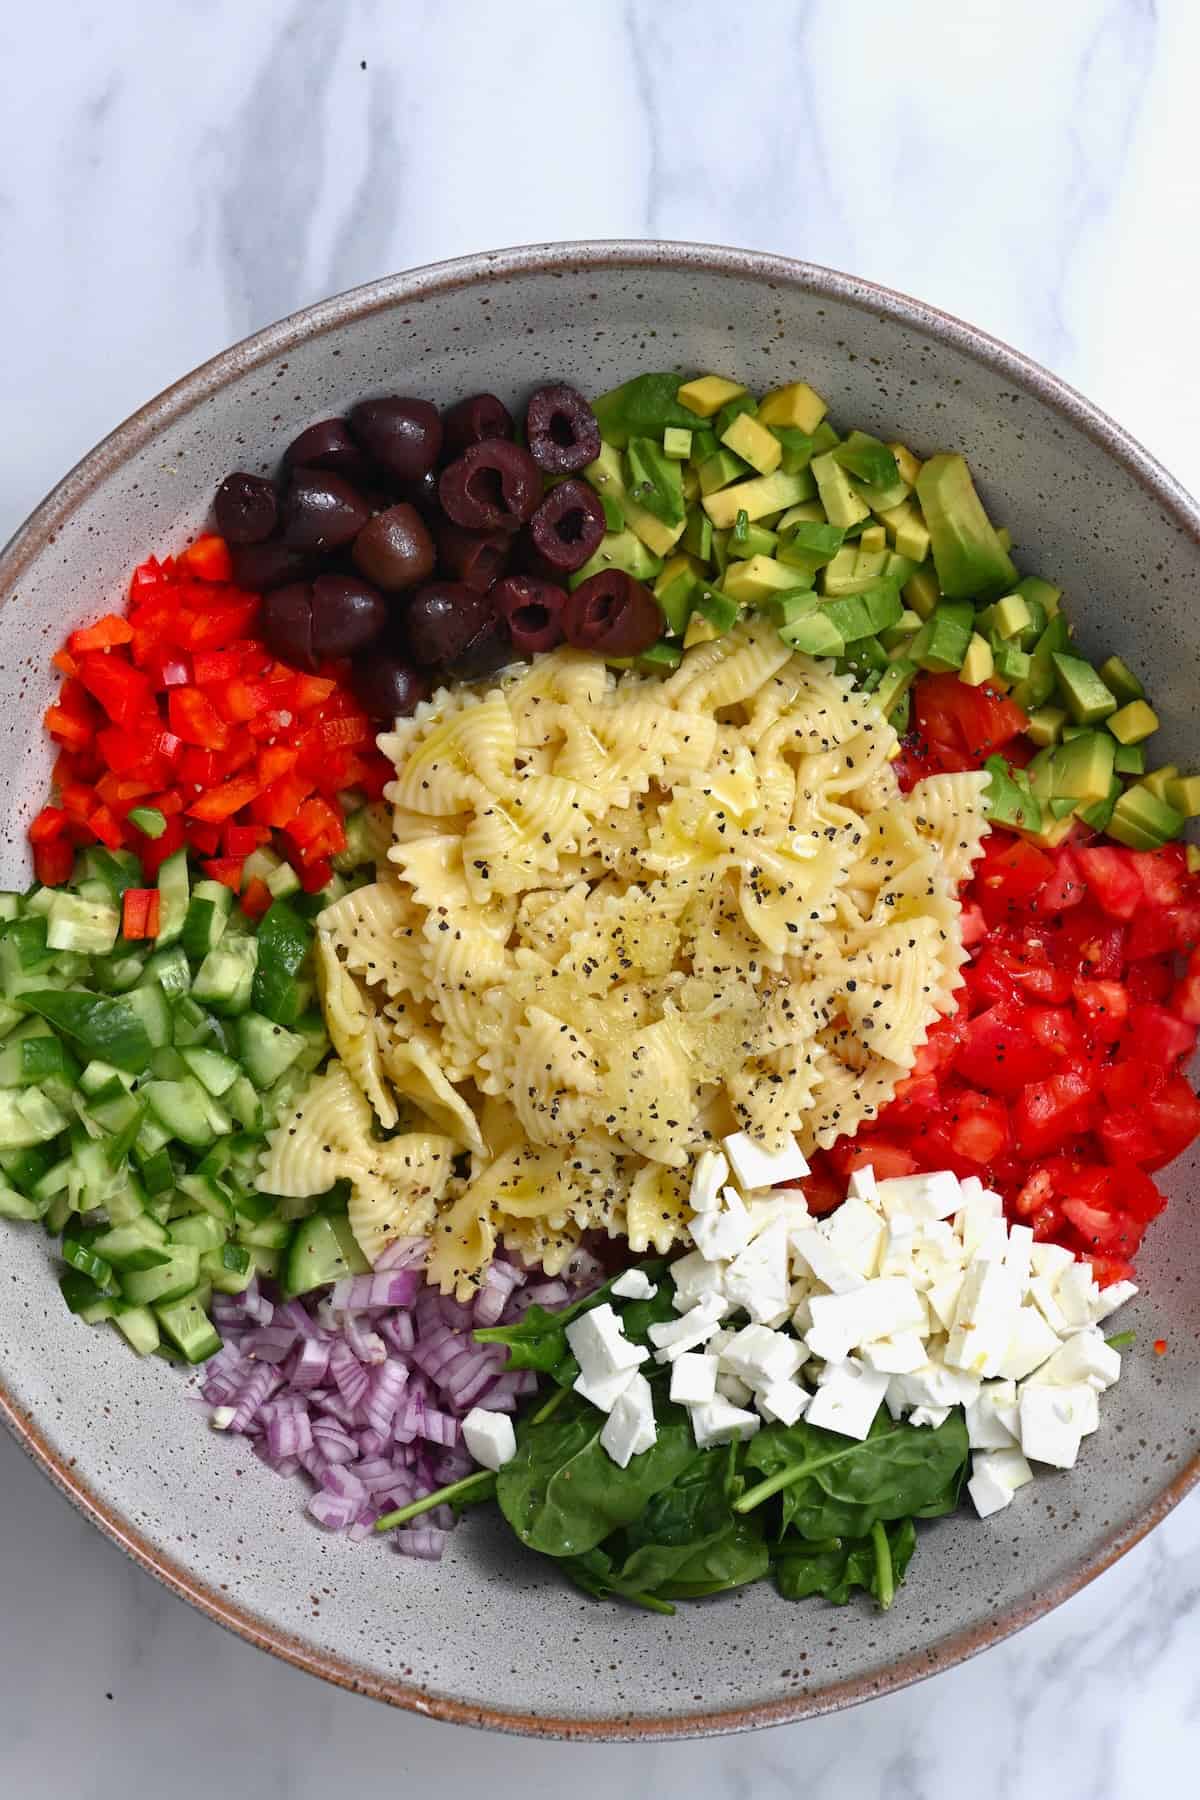 A bowl with ingredients for pasta salad